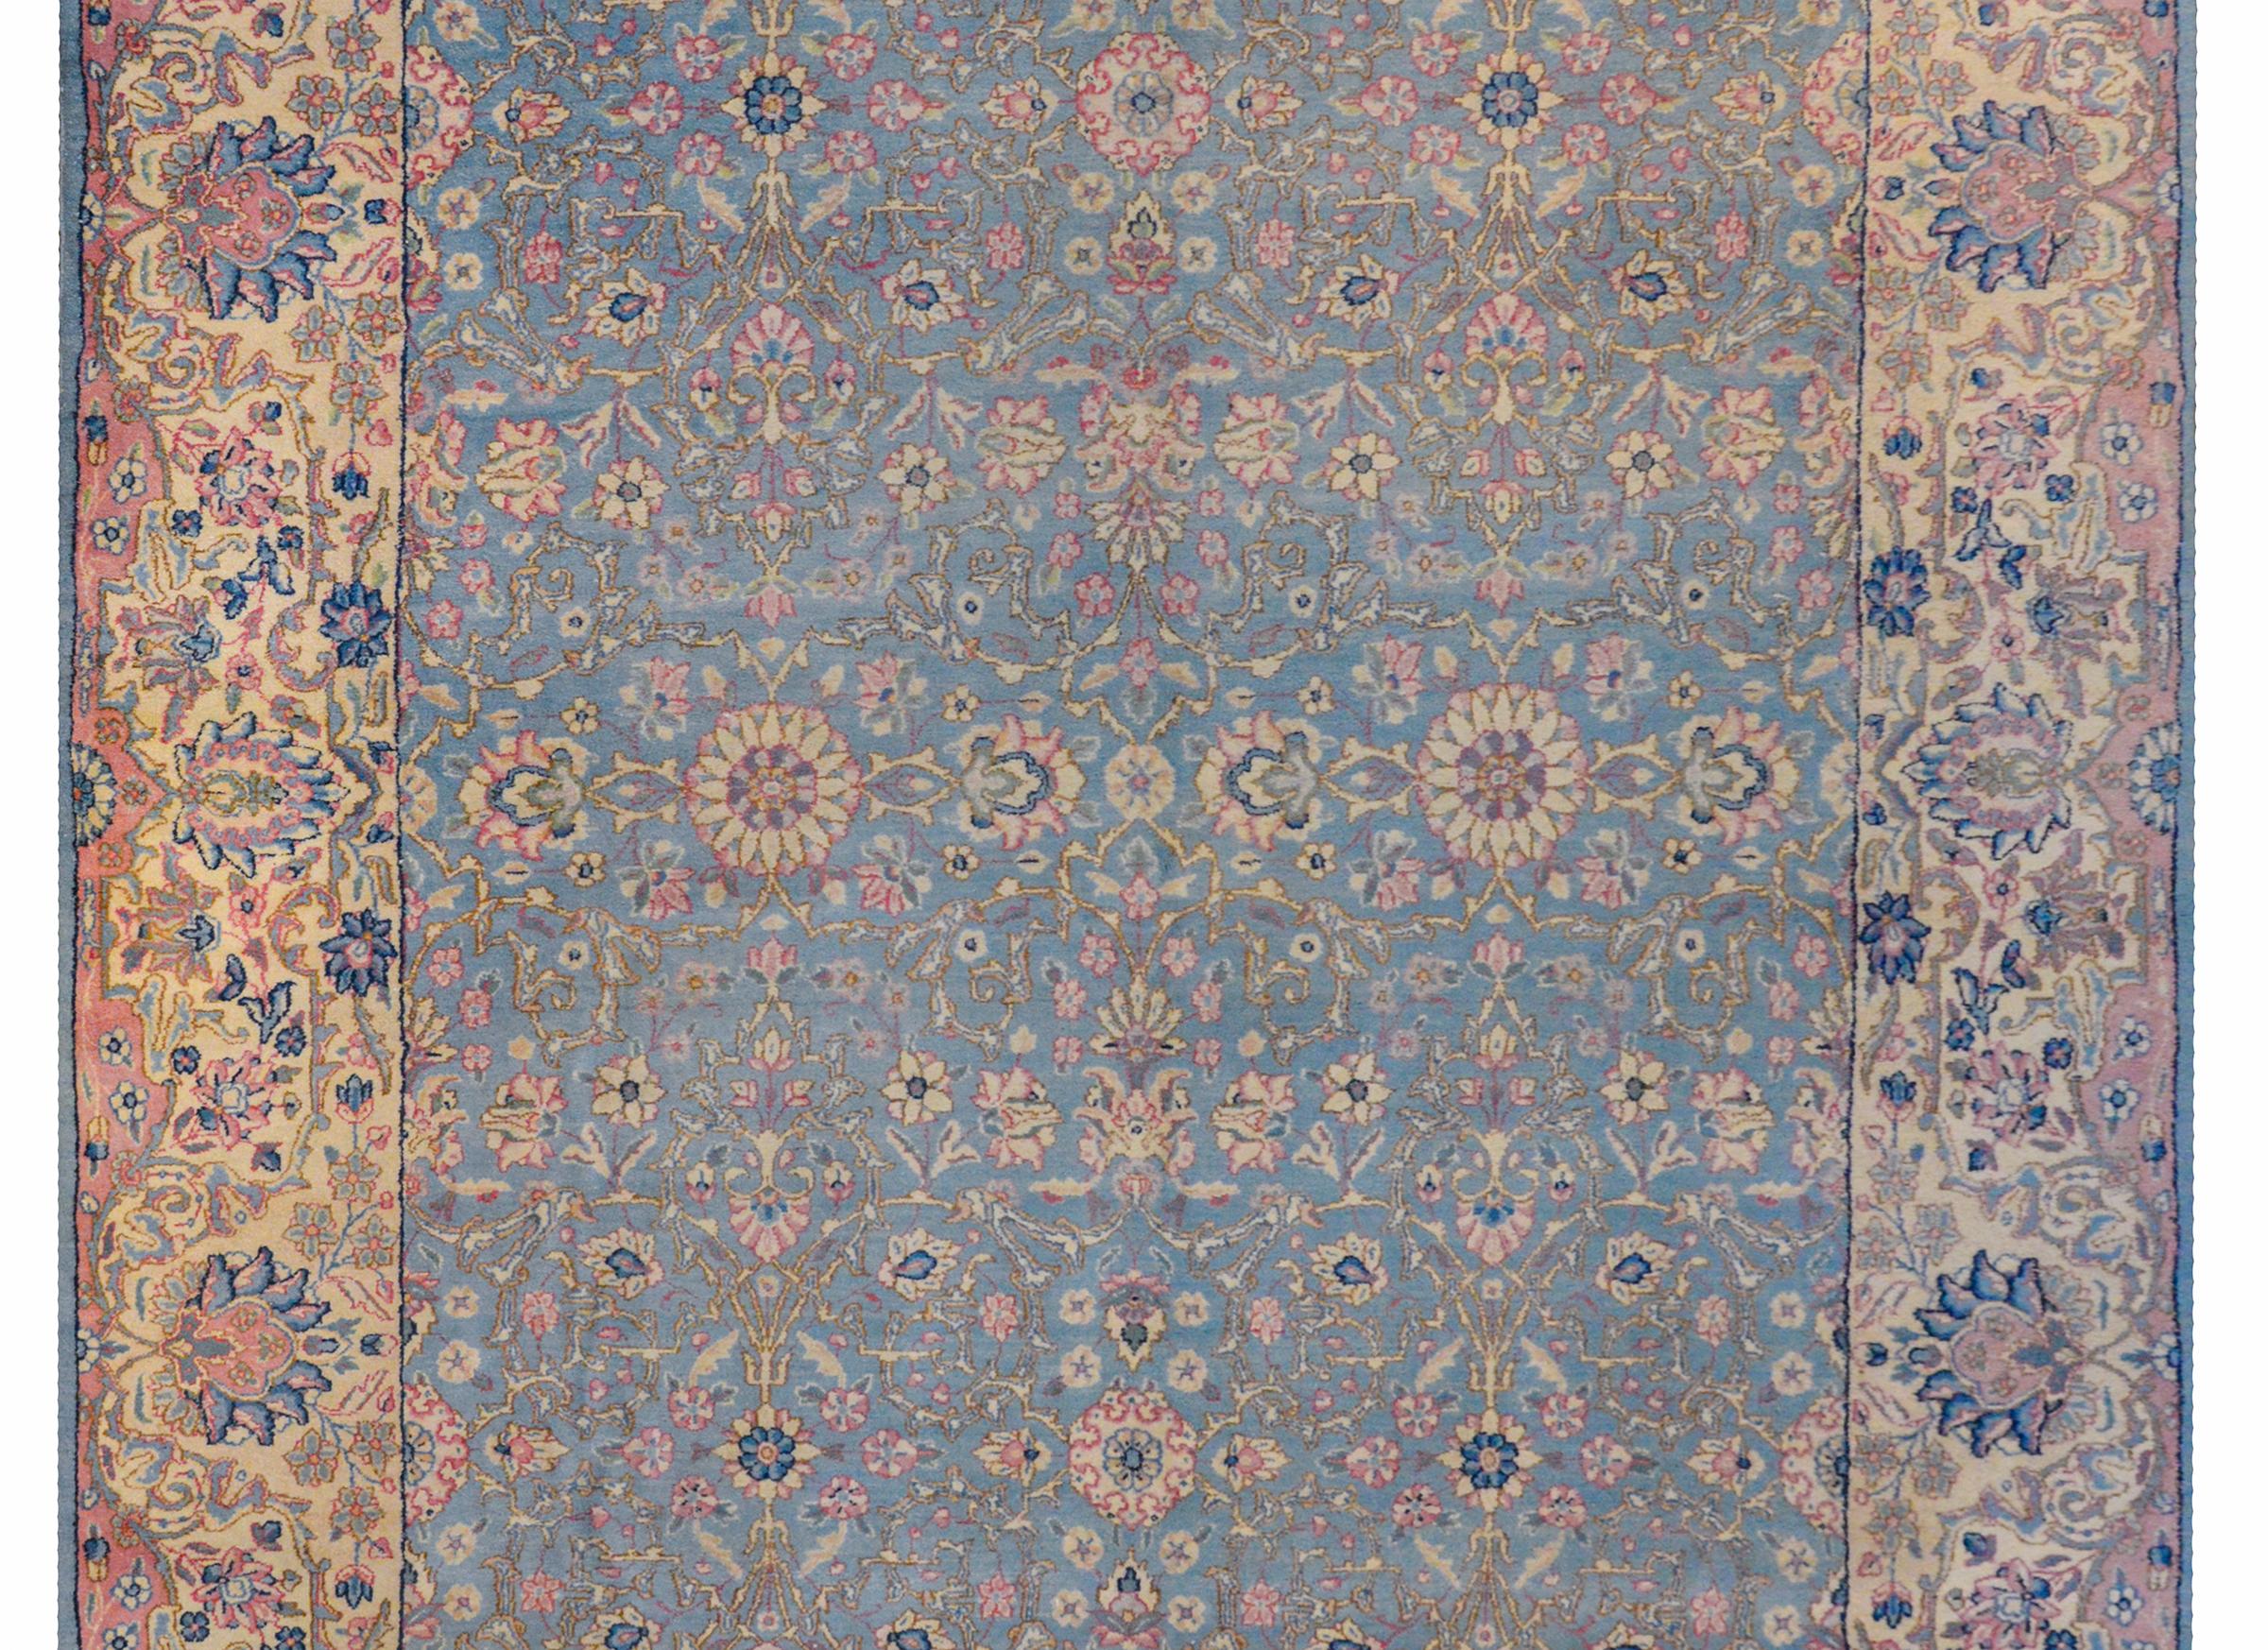 A wonderful early 20th century Persian Kirman rug with a floral lattice pattern woven in dreamy colors of pink, fuchsia, cream, and dark indigo on a light indigo background surrounded by an extraordinary wide border with a large-scale floral and